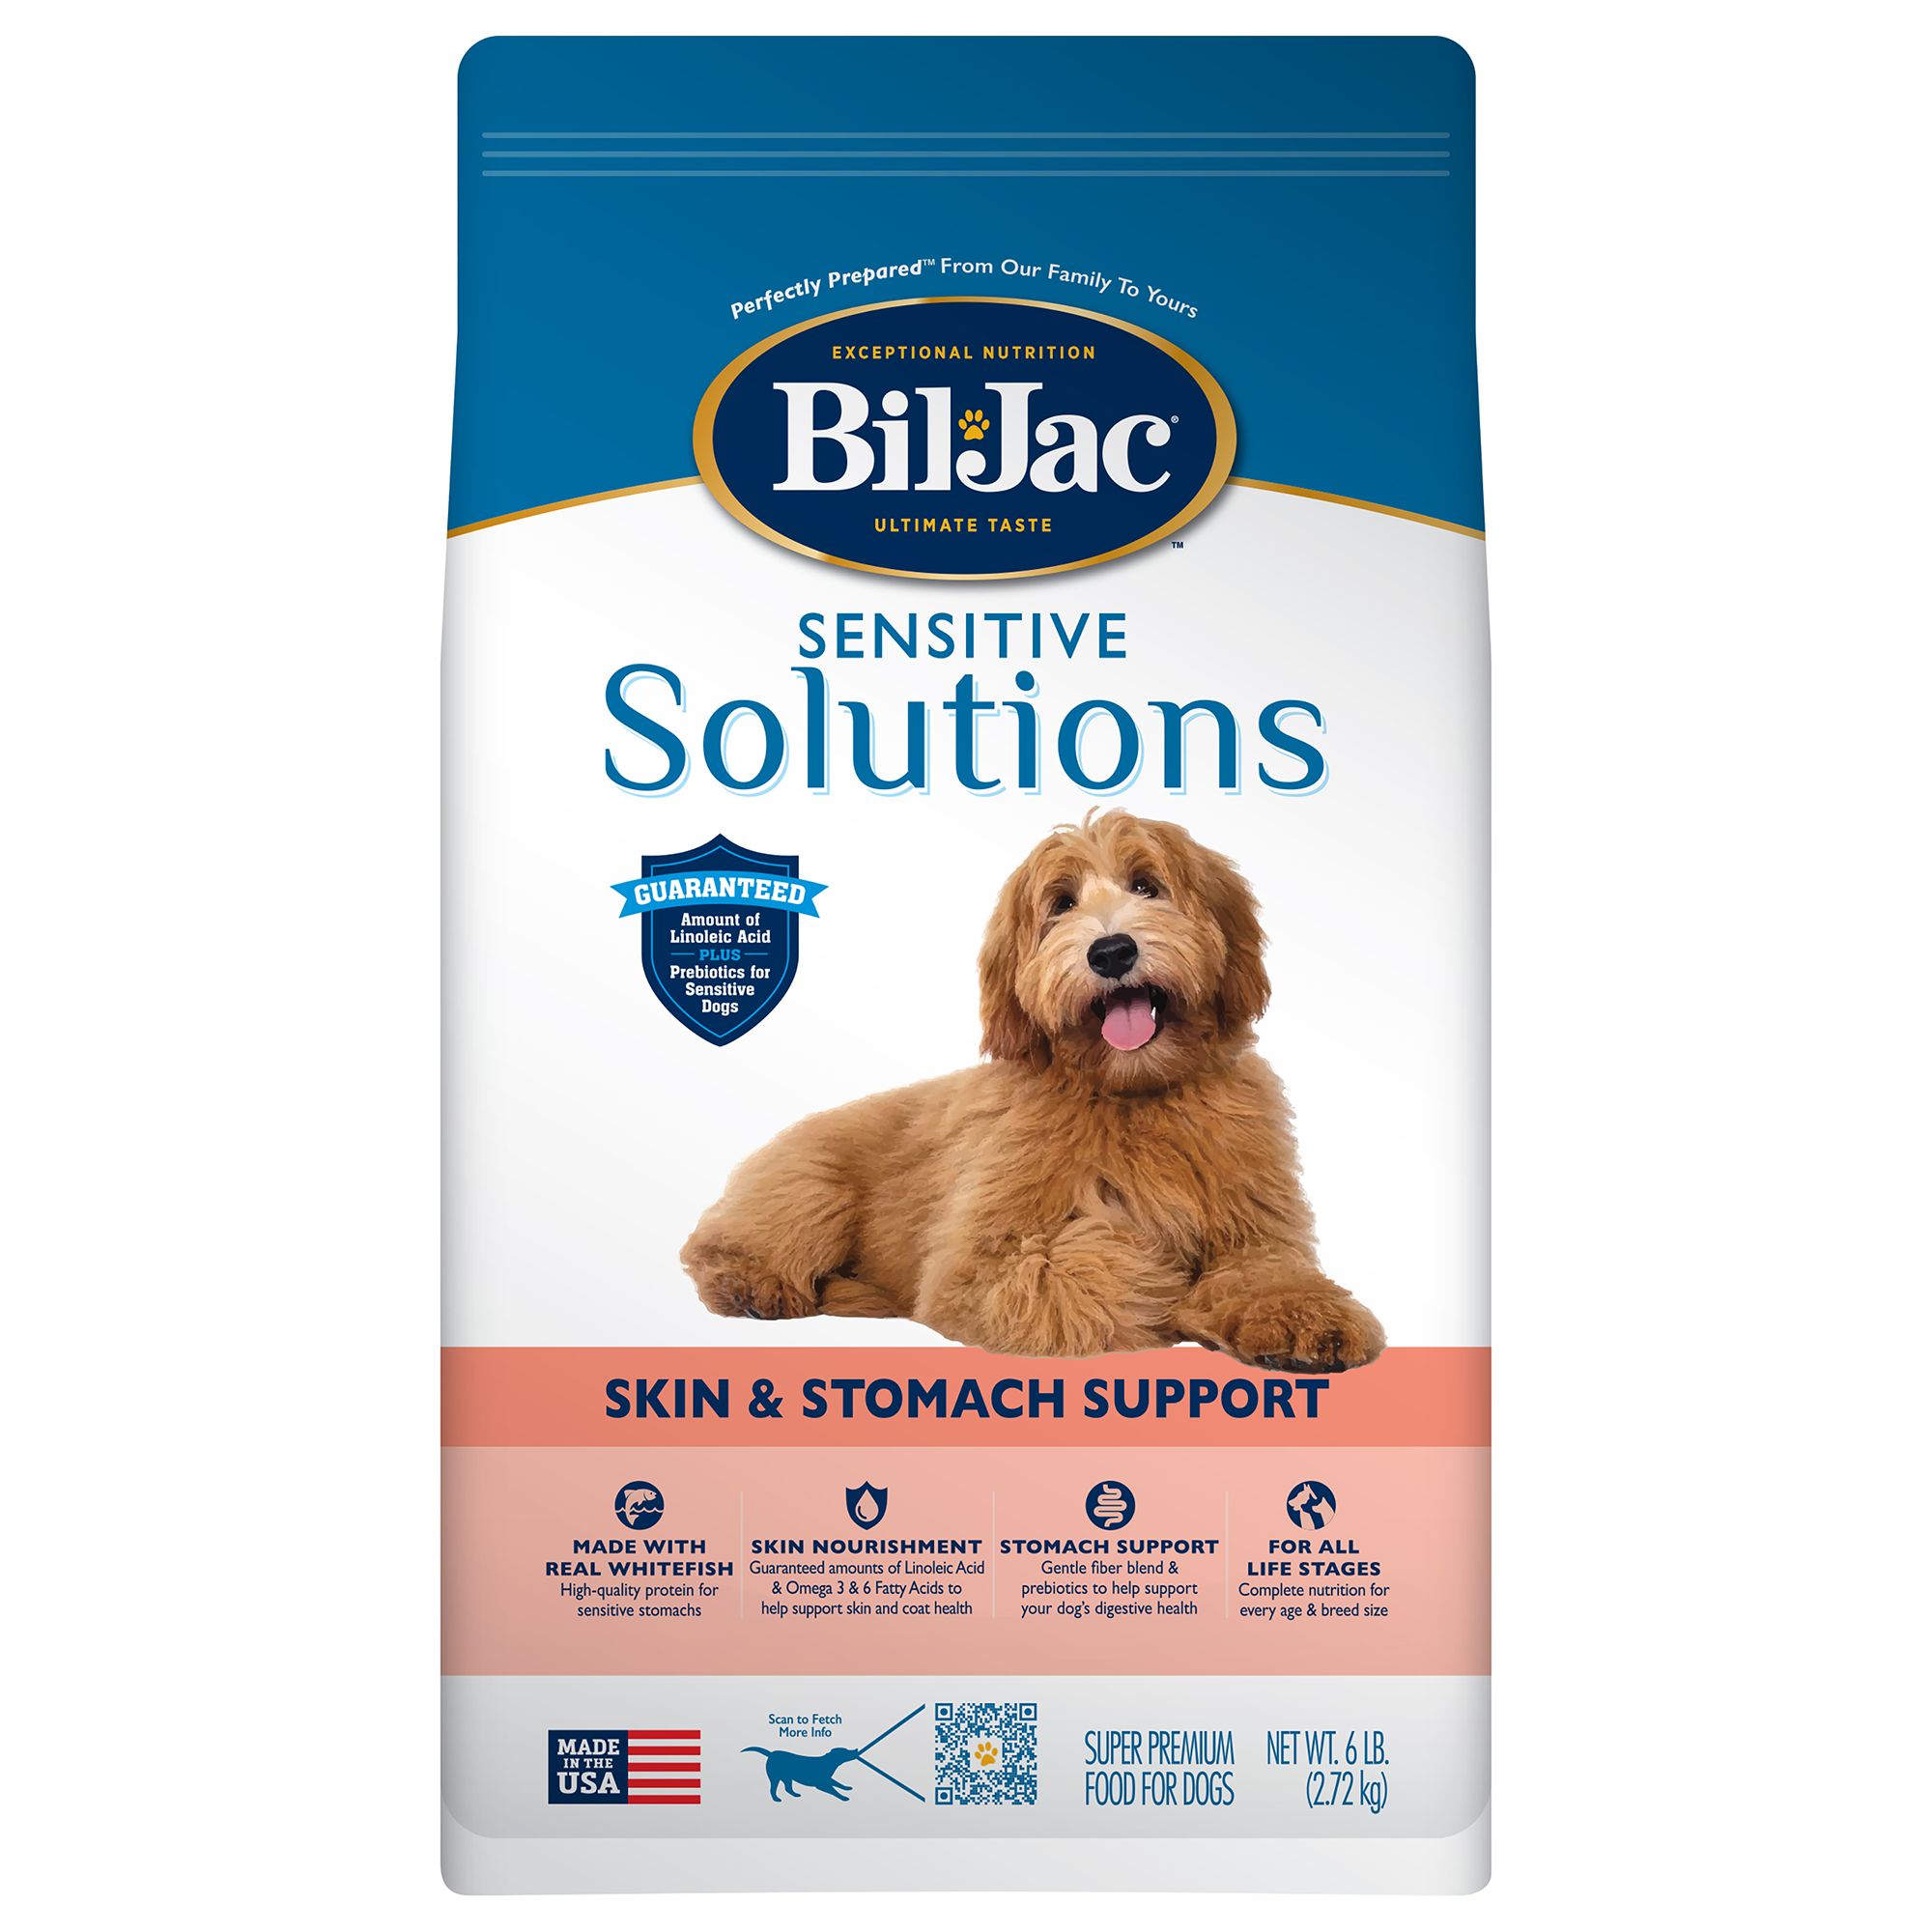 Bil-Jac Sensitive Solutions Adult Dog Food size: 6 Lb, Chicken & Whitefish, Kibble, Puppy to Senior